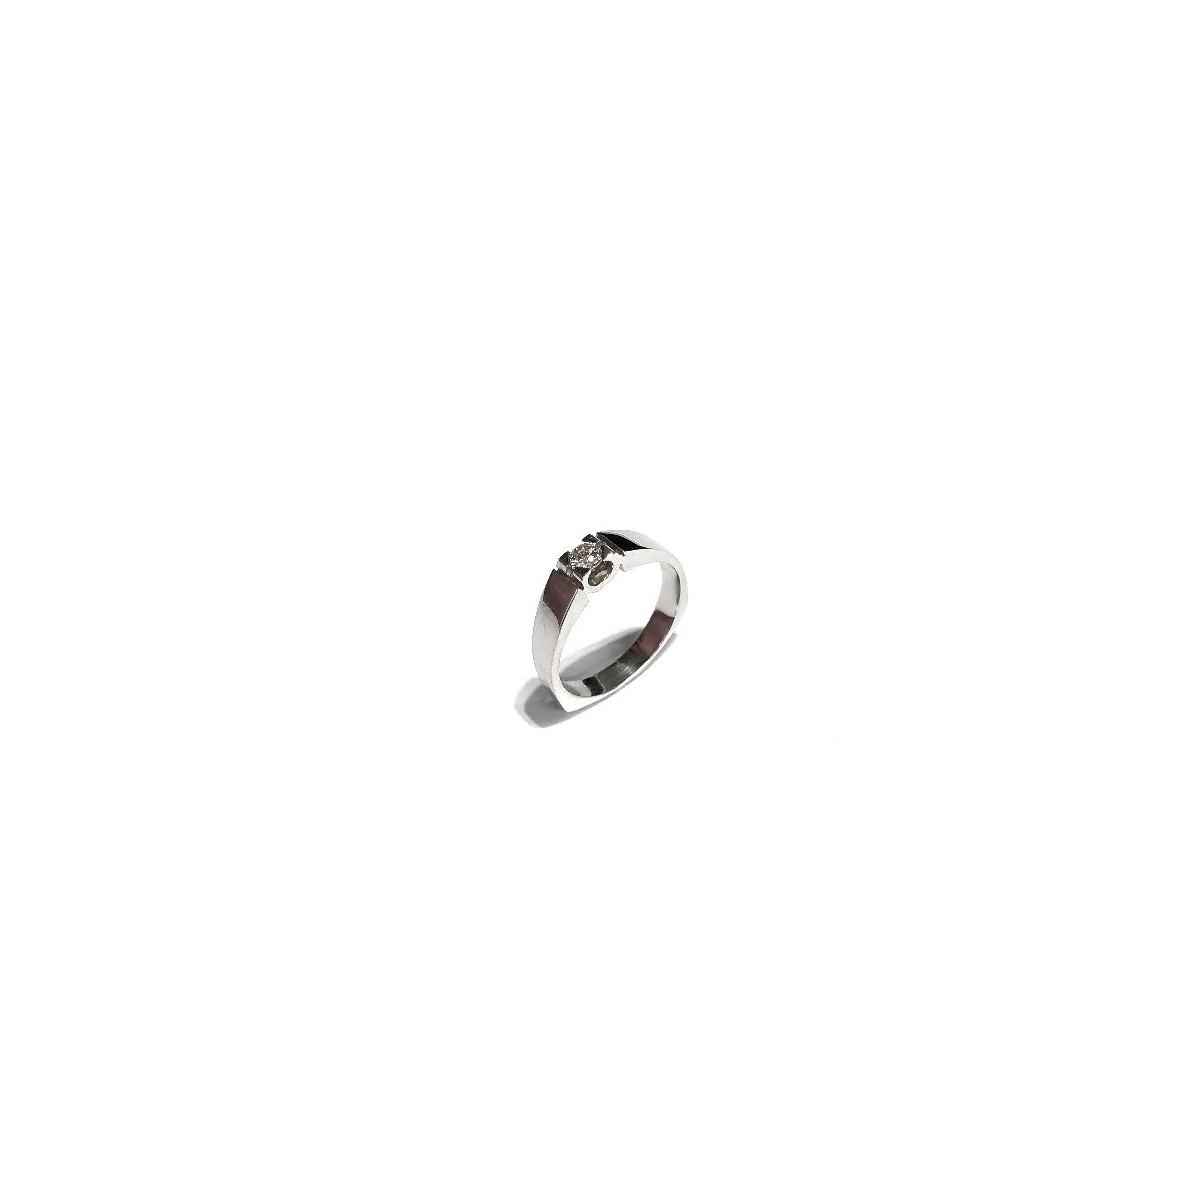 WHITE GOLD SOLITARY CLIMENT 1890 RING - S-2419/BR